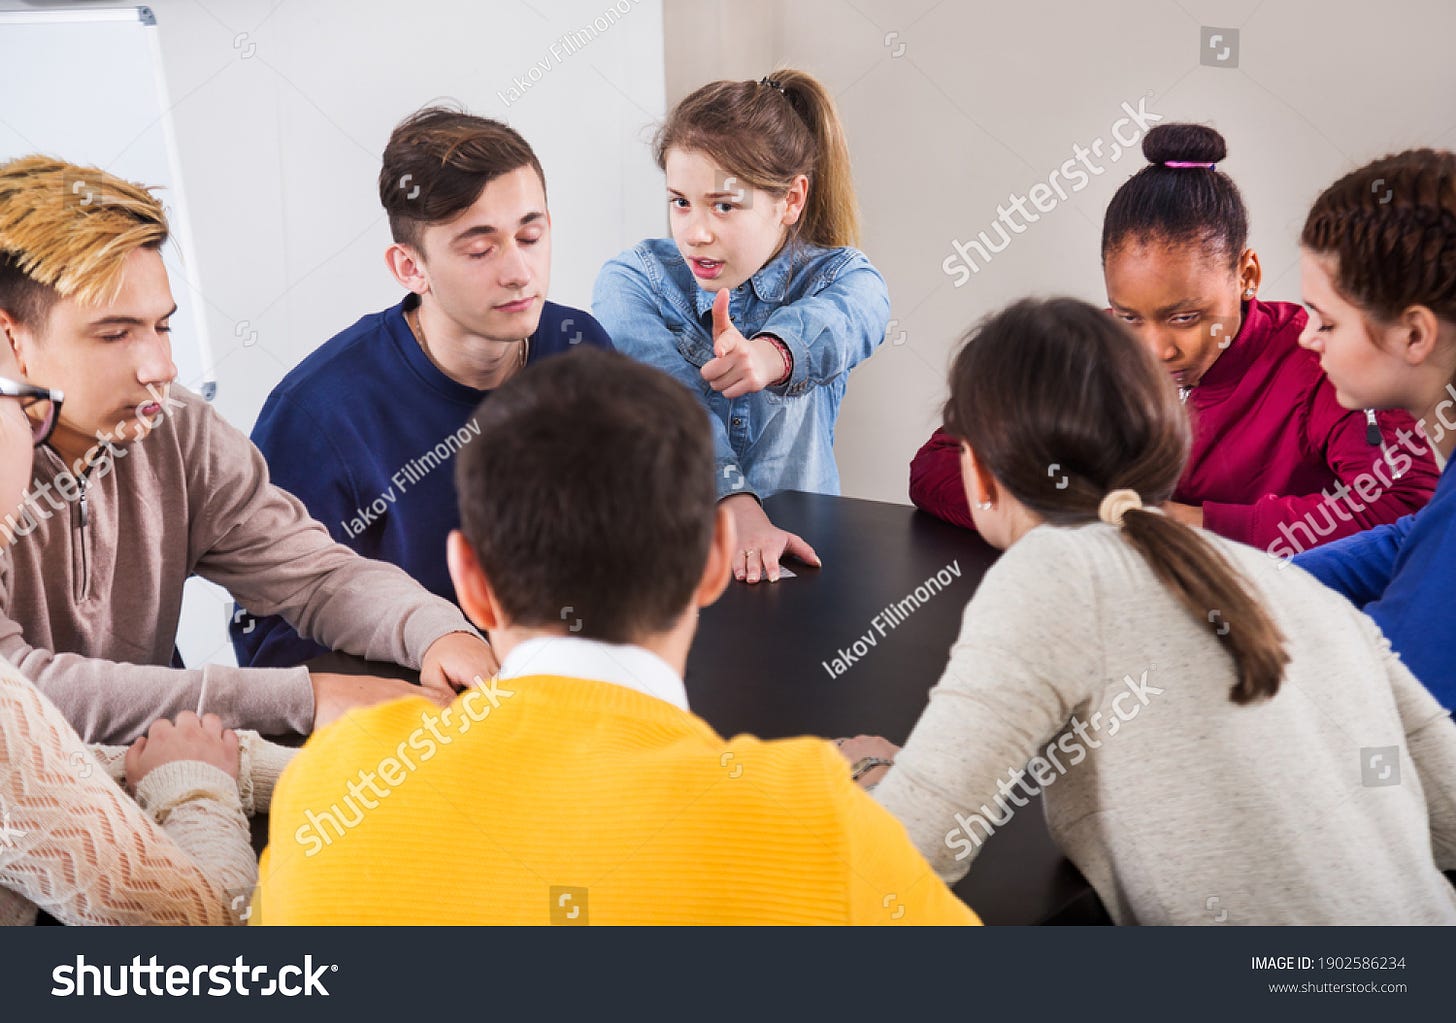 1,658 Playing Mafia Game Images, Stock Photos & Vectors | Shutterstock